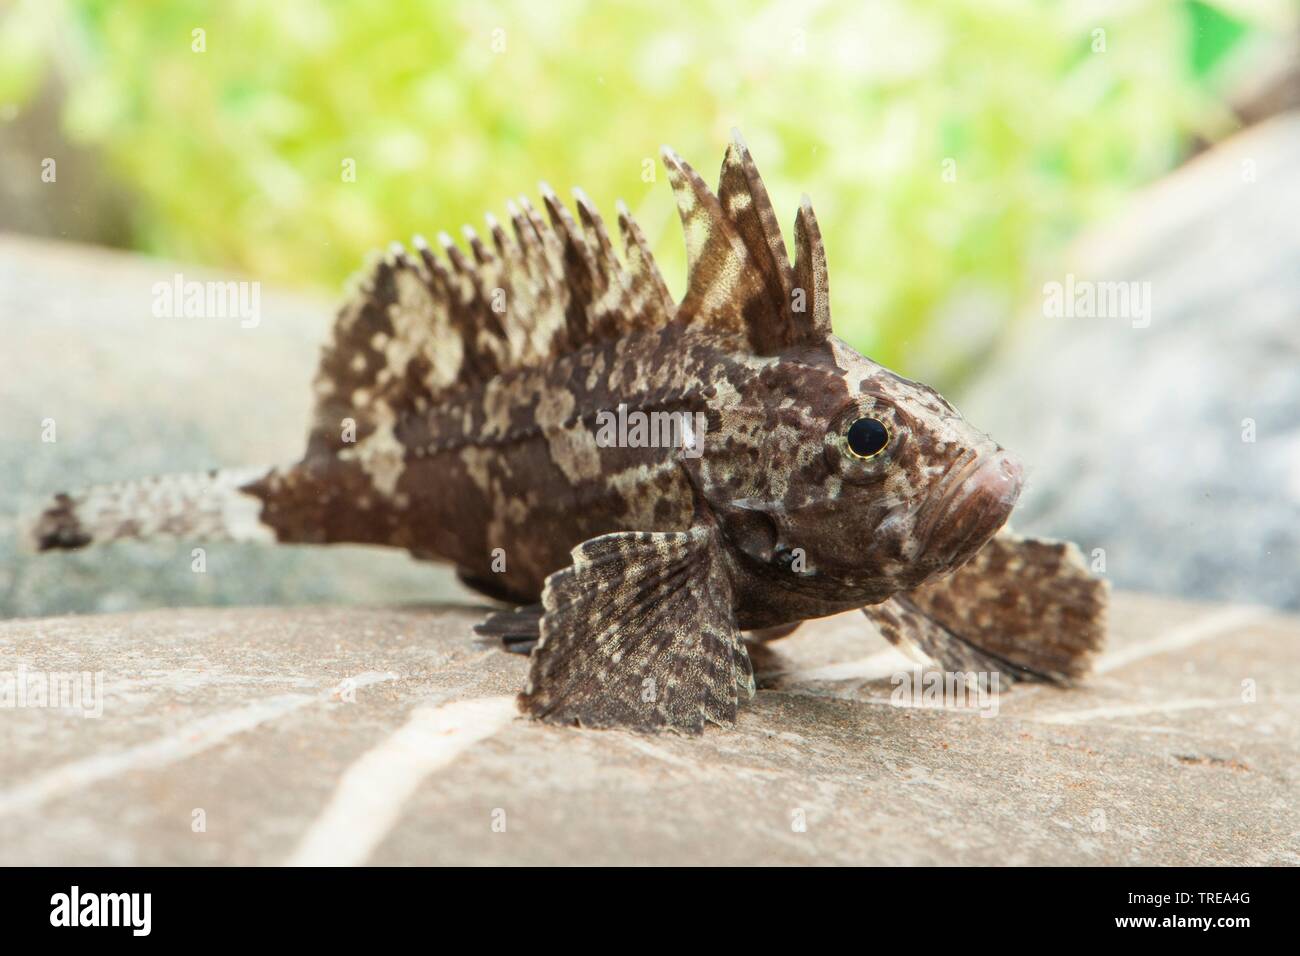 leaf goblinfish (Neovespicula depressifrons), on a stone under water, side view Stock Photo